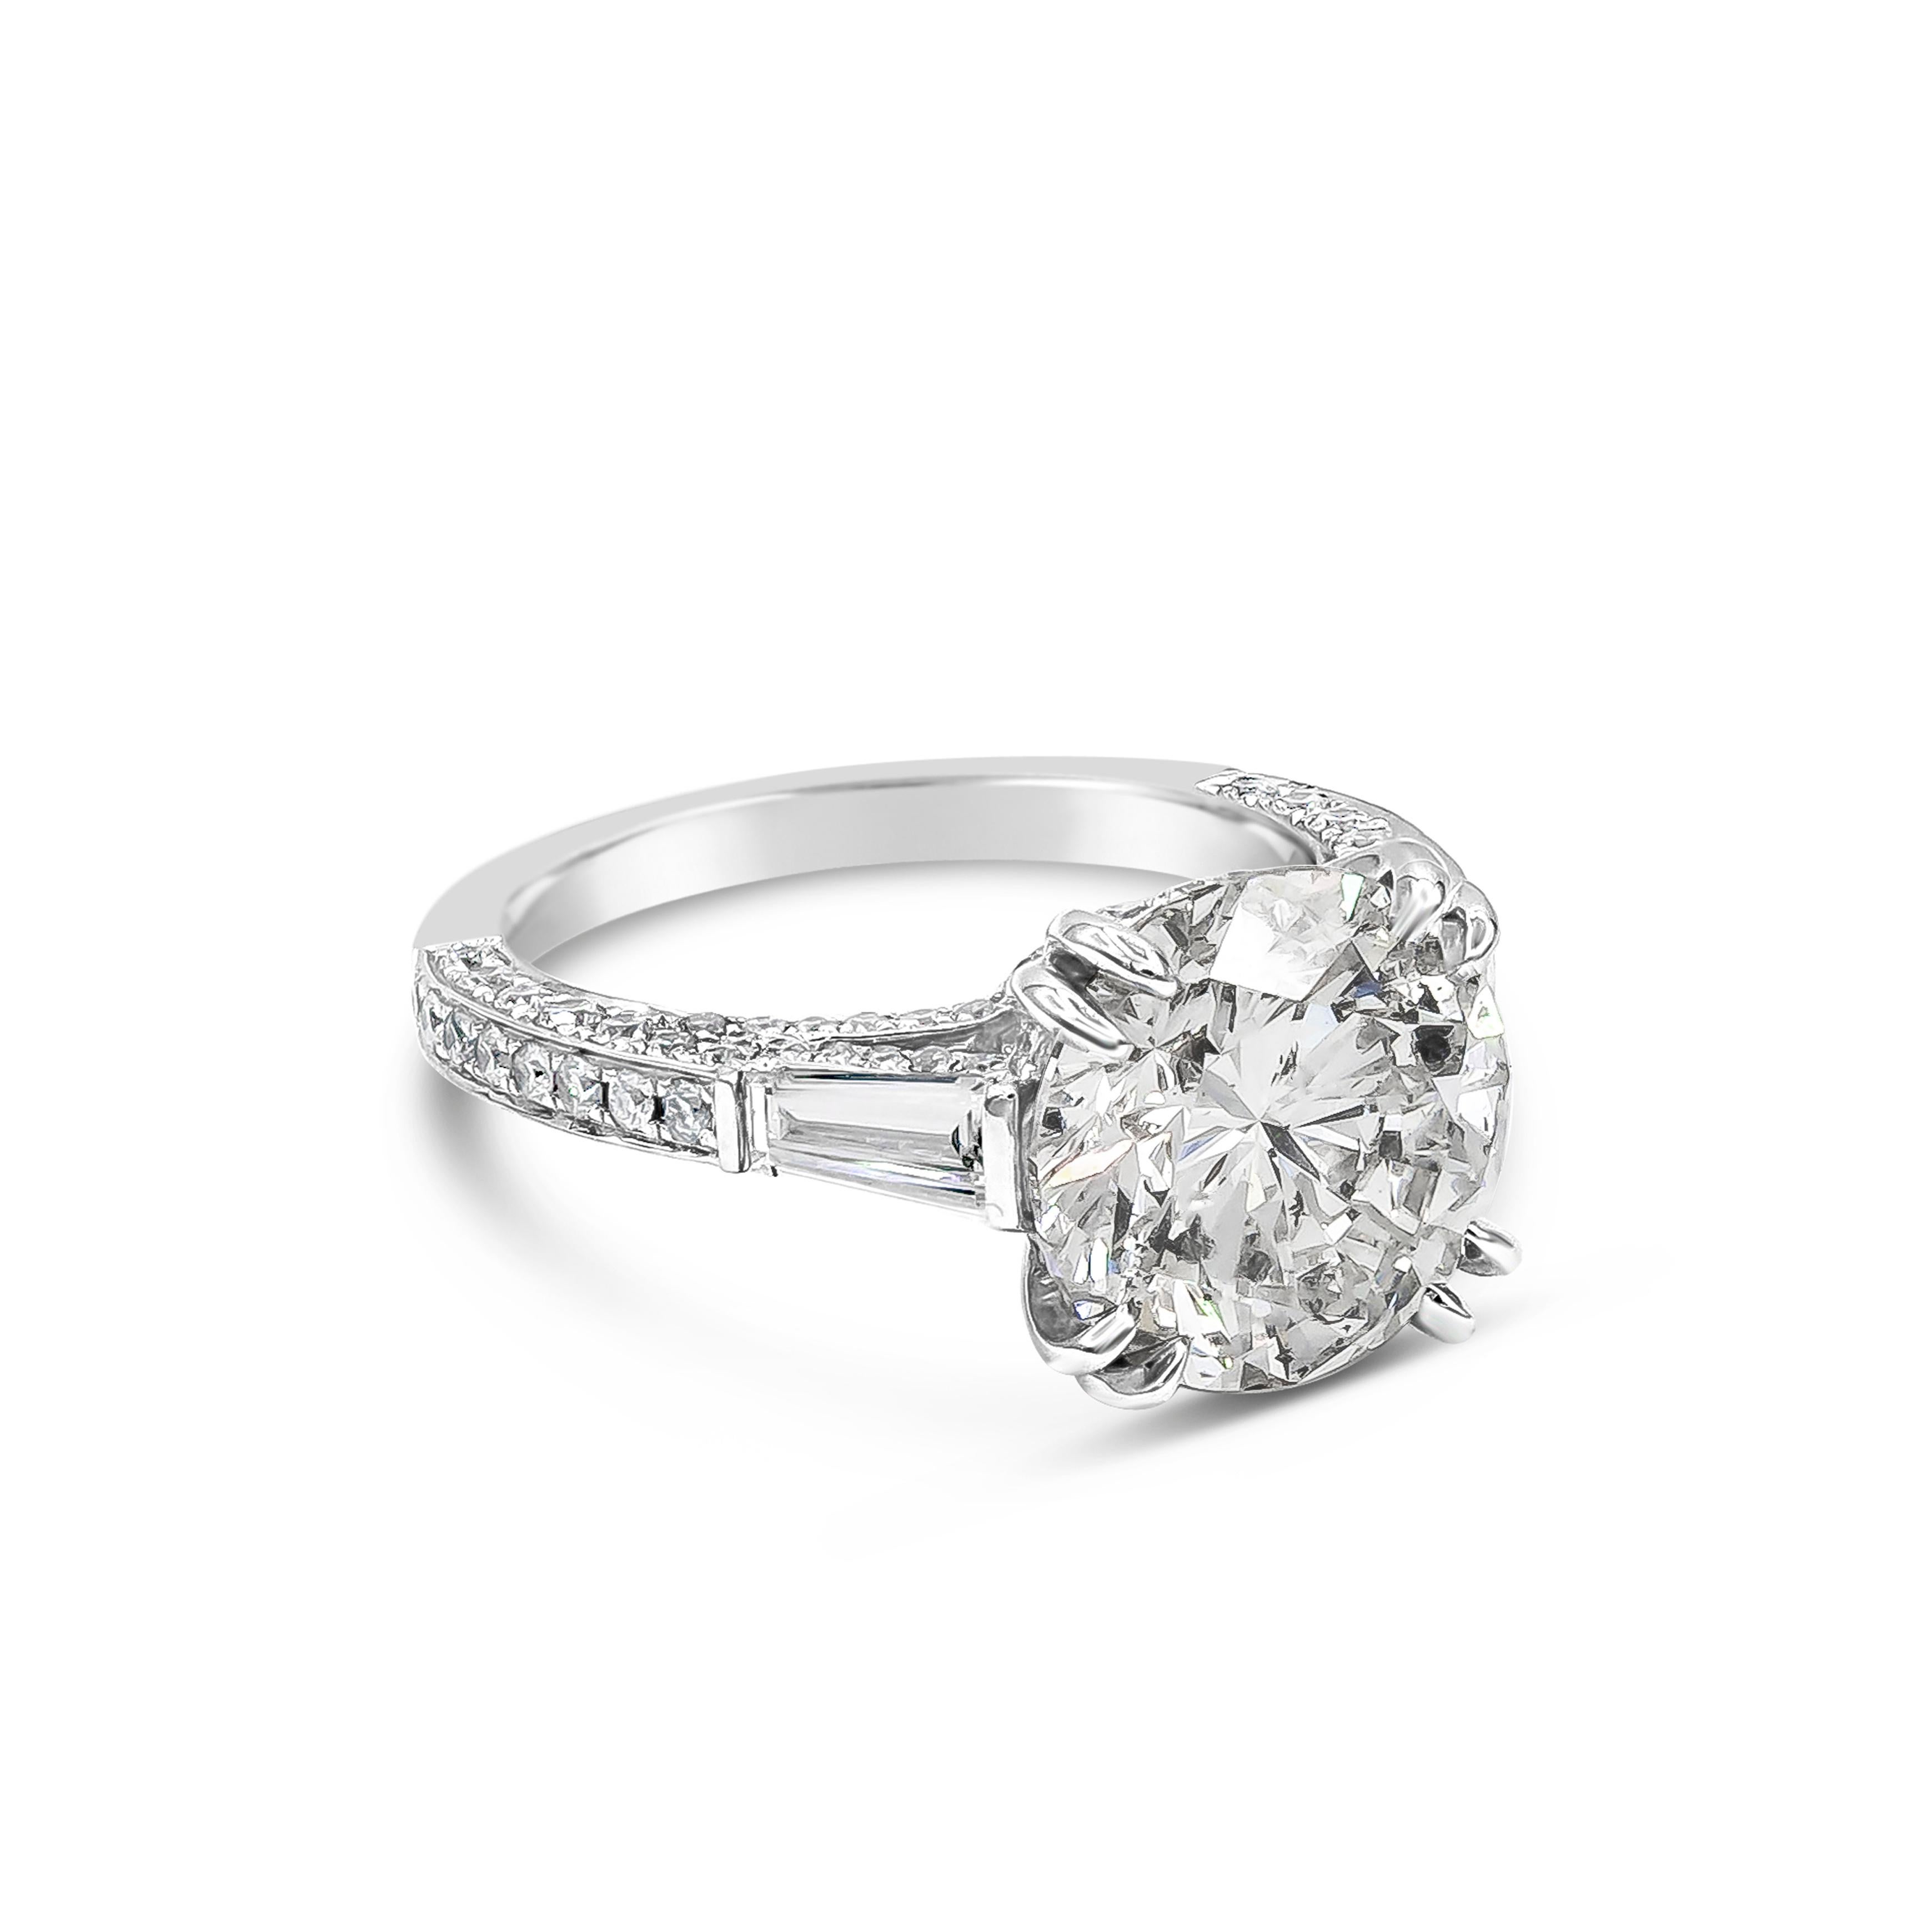 This gorgeous three stone engagement ring features a 4.53 carats brilliant round cut diamond certified by EGL as E color and SI2 in clarity, set in an eight prong basket setting. Flanked by tapered baguette diamonds on either side and accented with